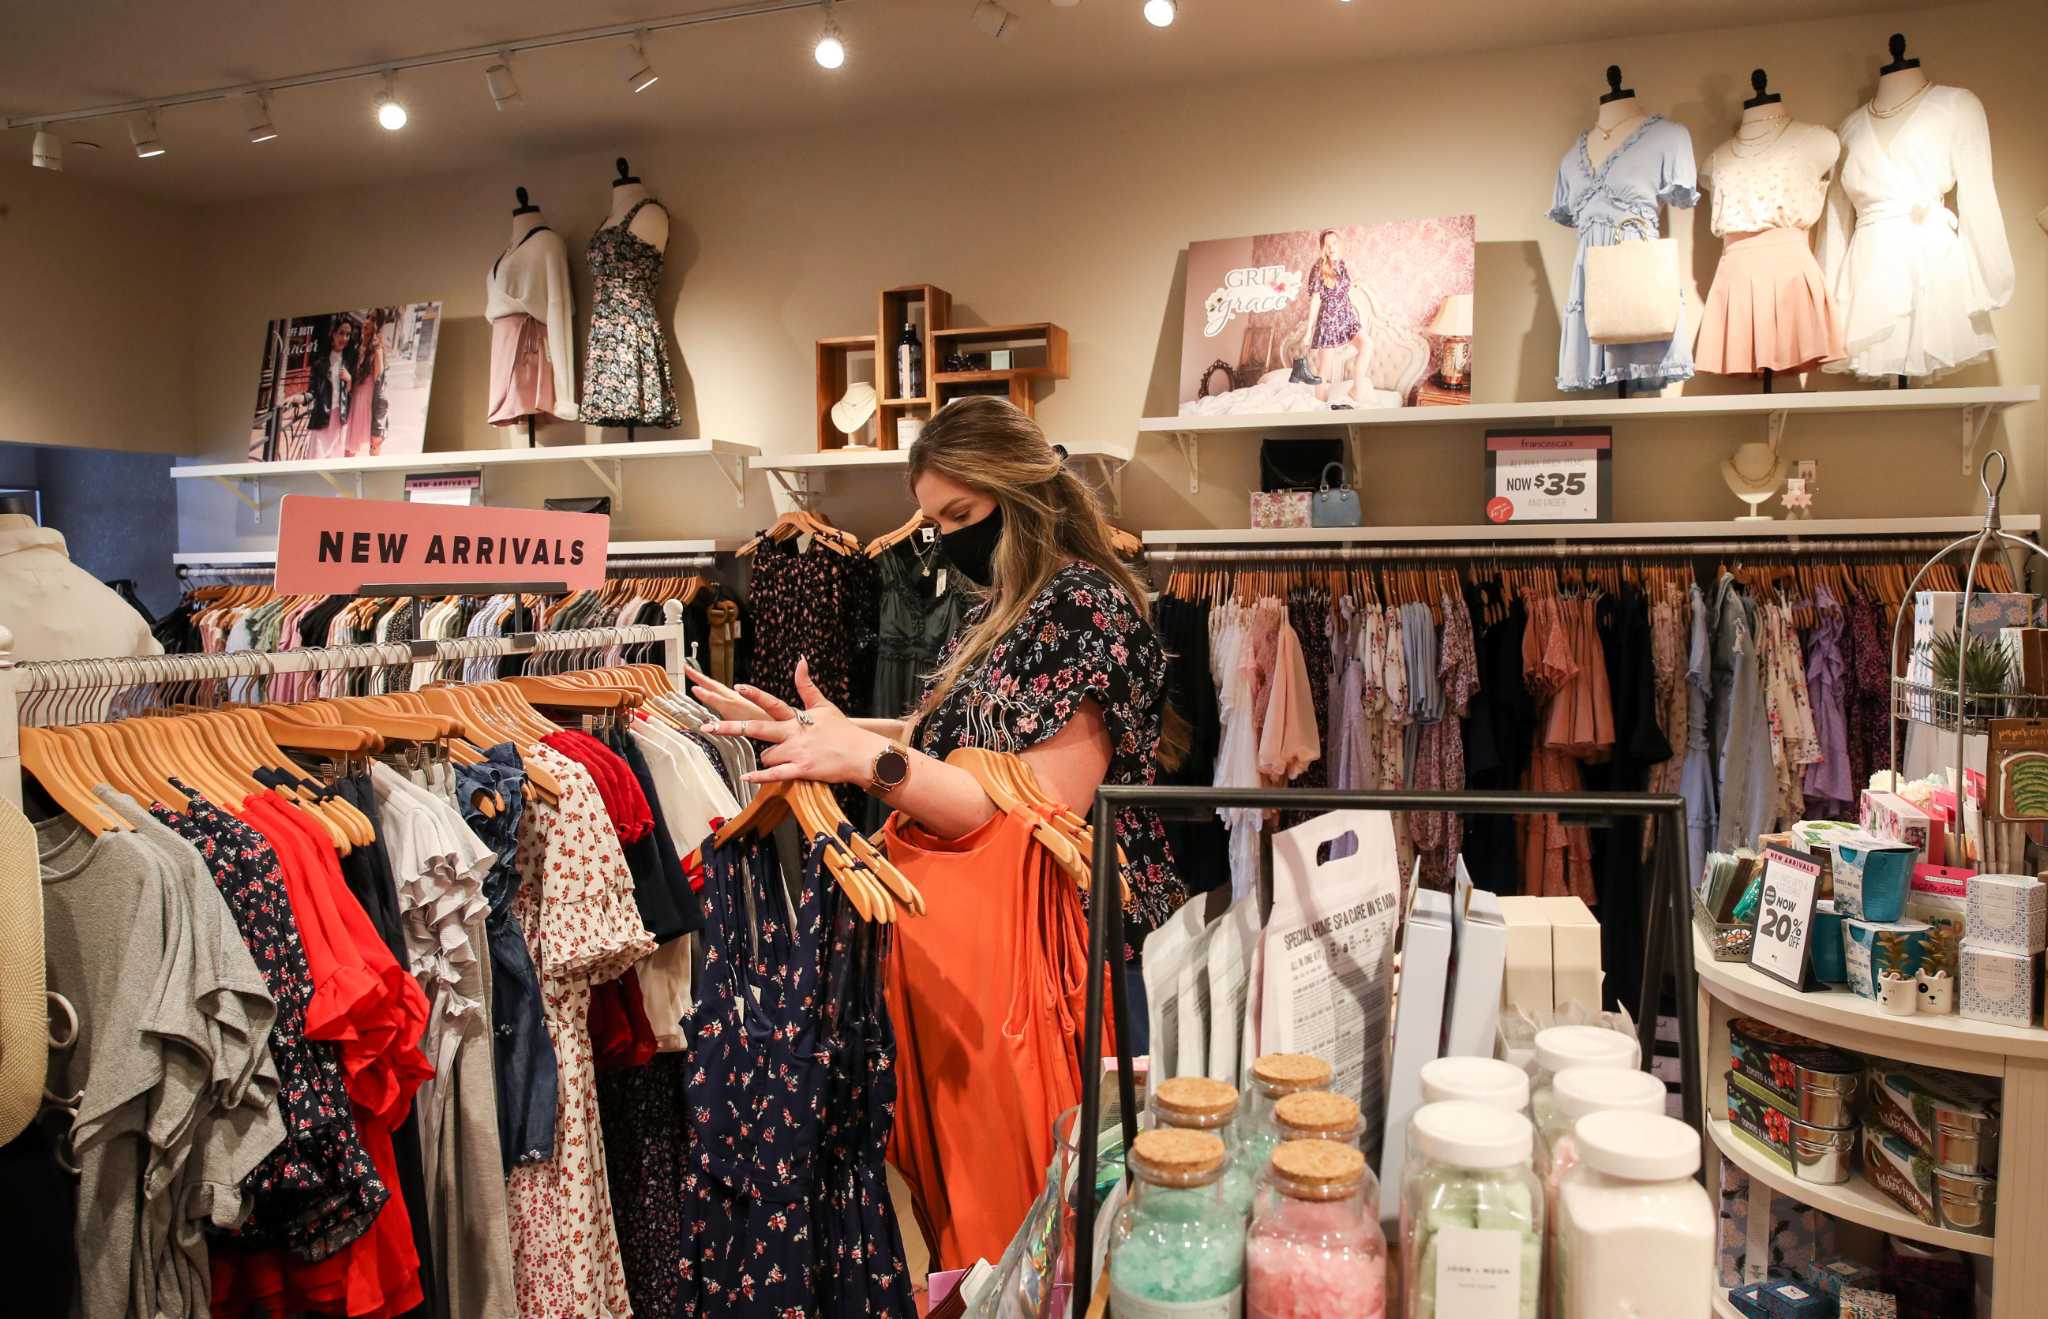 Francesca's boutique now open at The Galleria in Houston